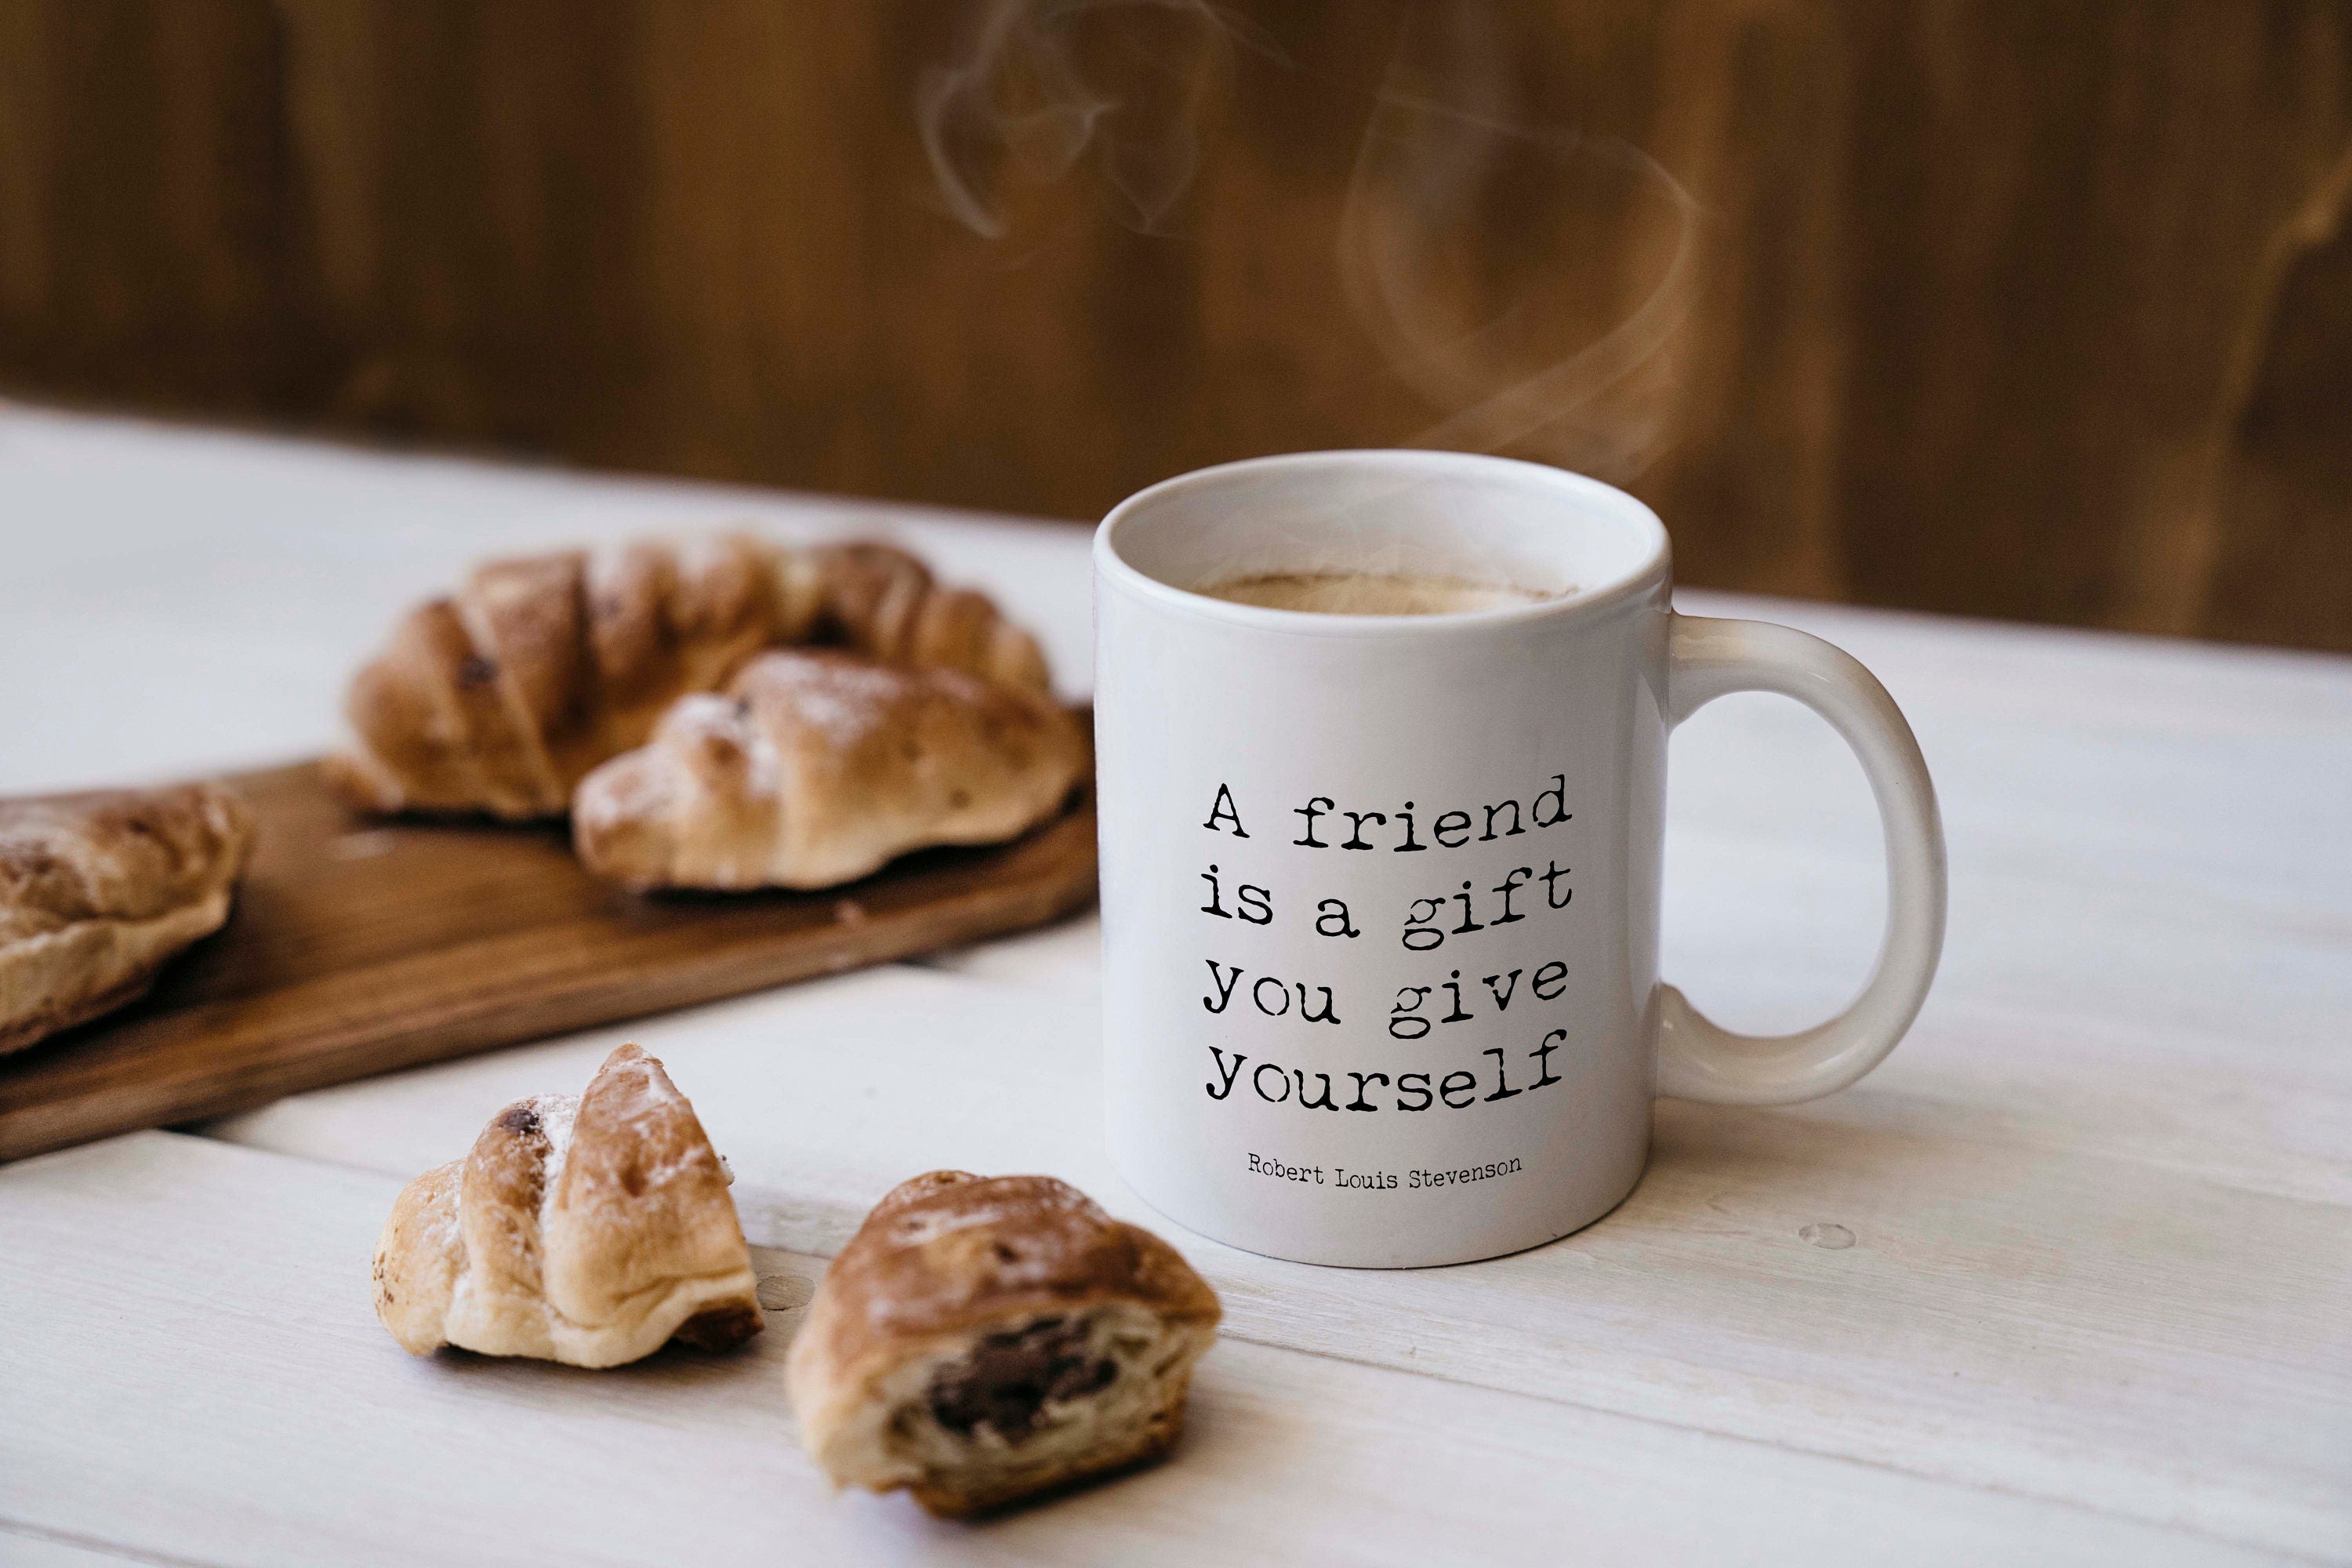 Best Friend Birthday Gift Robert Louis Stevenson Quote Coffee Mug, Tea Mug - A Friend Is A Gift You Give Yourself